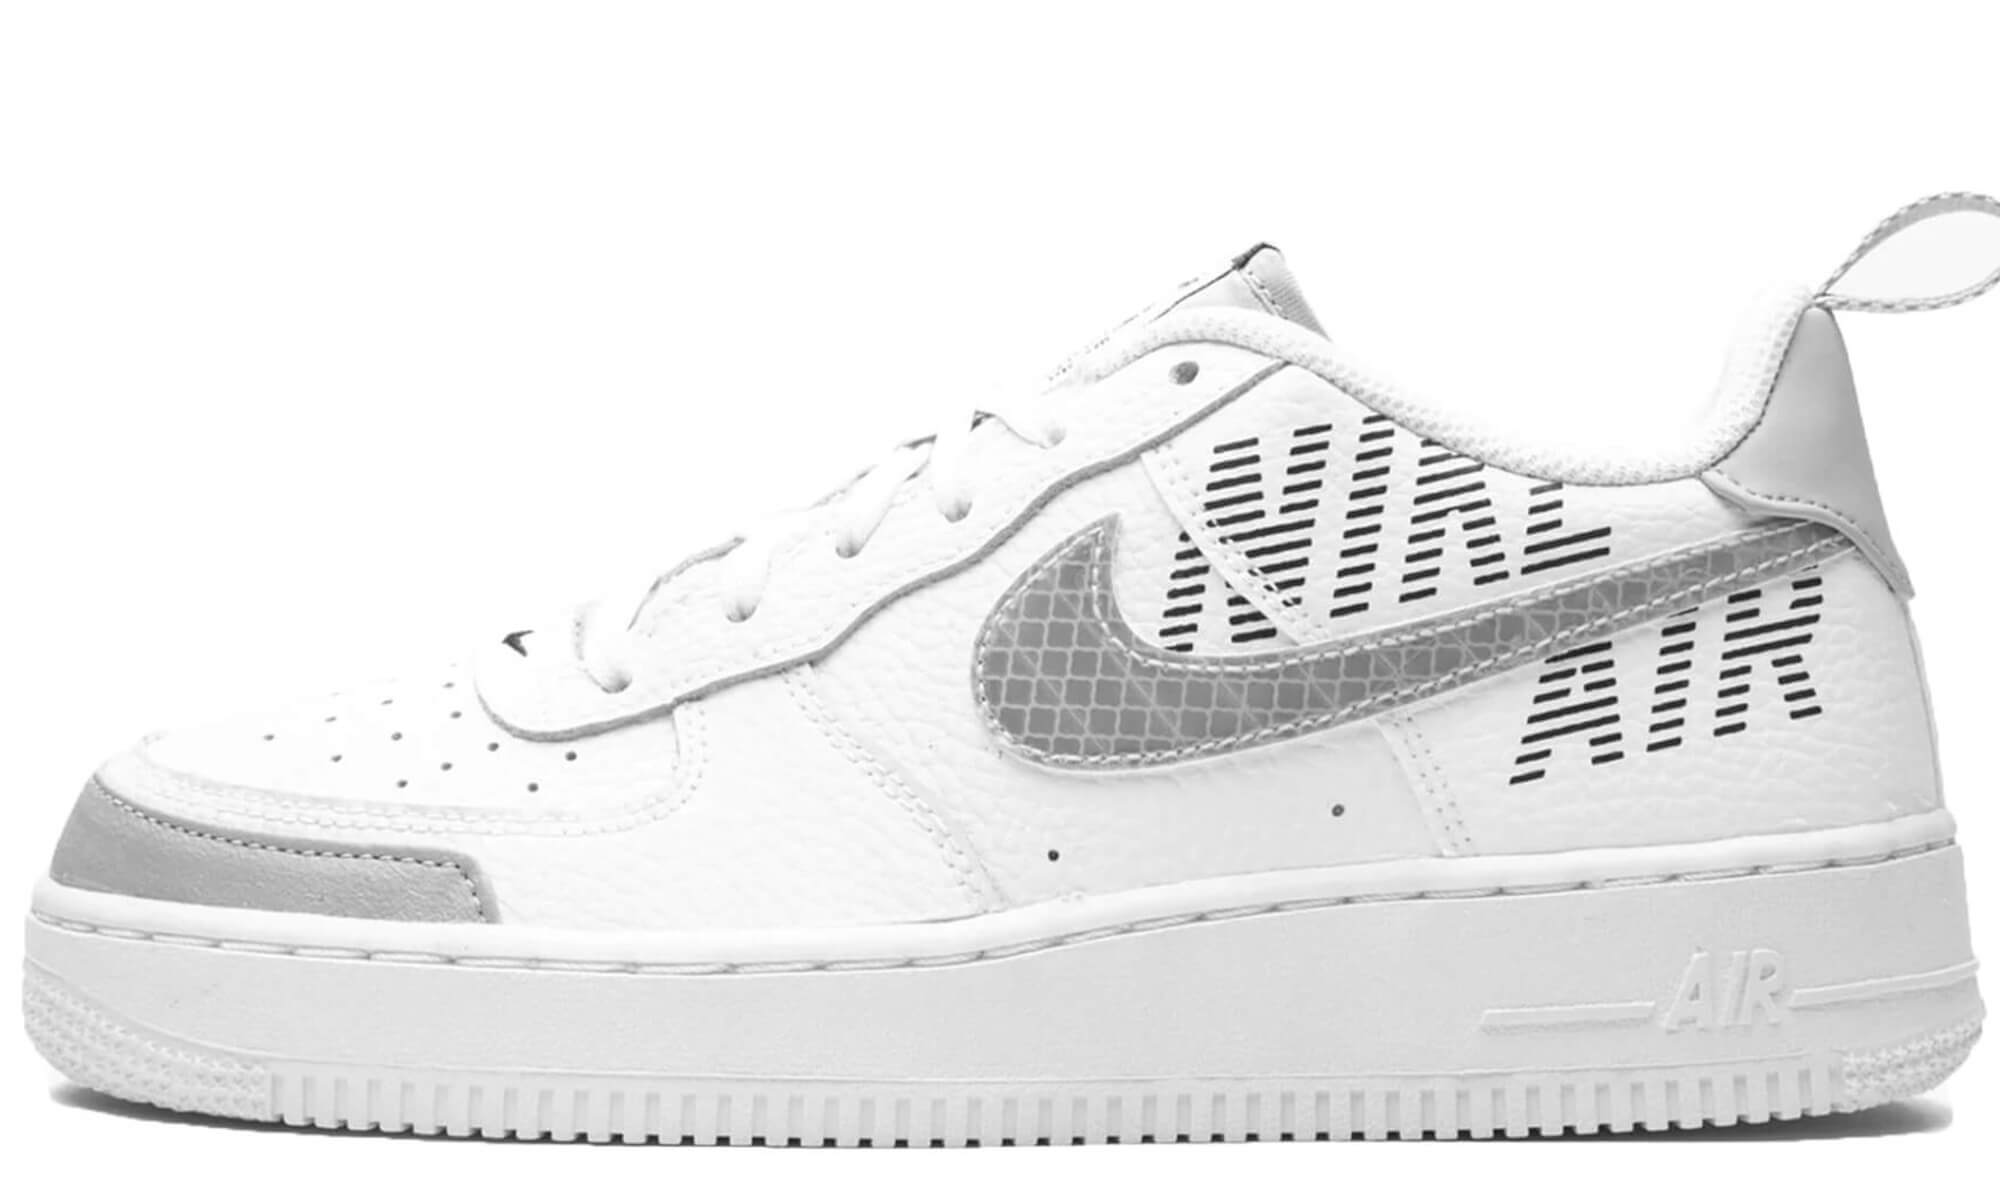 Nike Air Force 1 '07 LV8 White Grey for Sale, Authenticity Guaranteed